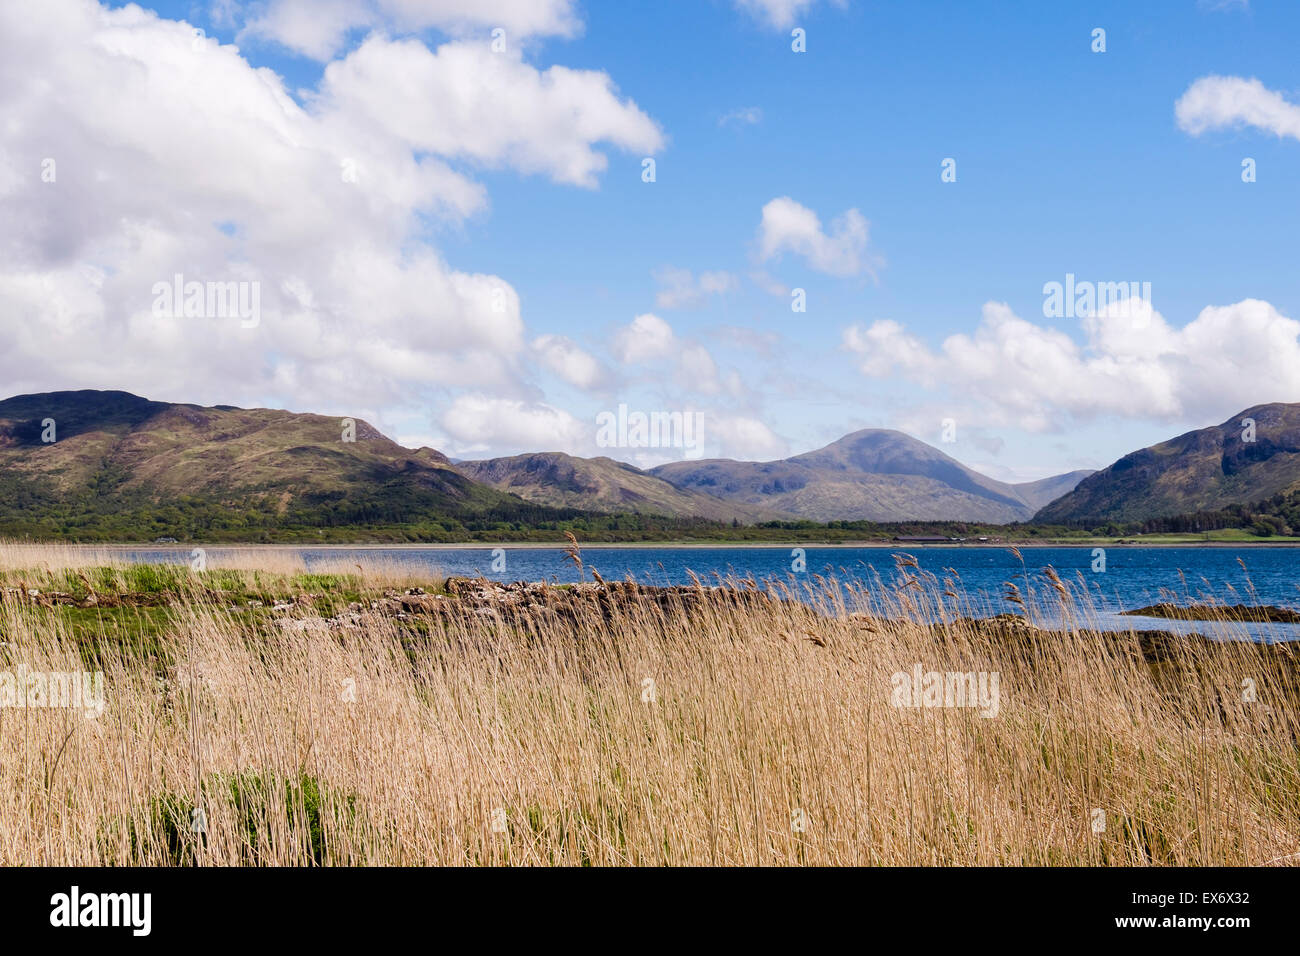 View across Loch na Keal to mountains from Kellan on Scottish island. Isle of Mull Argyll and Bute Inner Hebrides Western Isles Scotland UK Britain Stock Photo